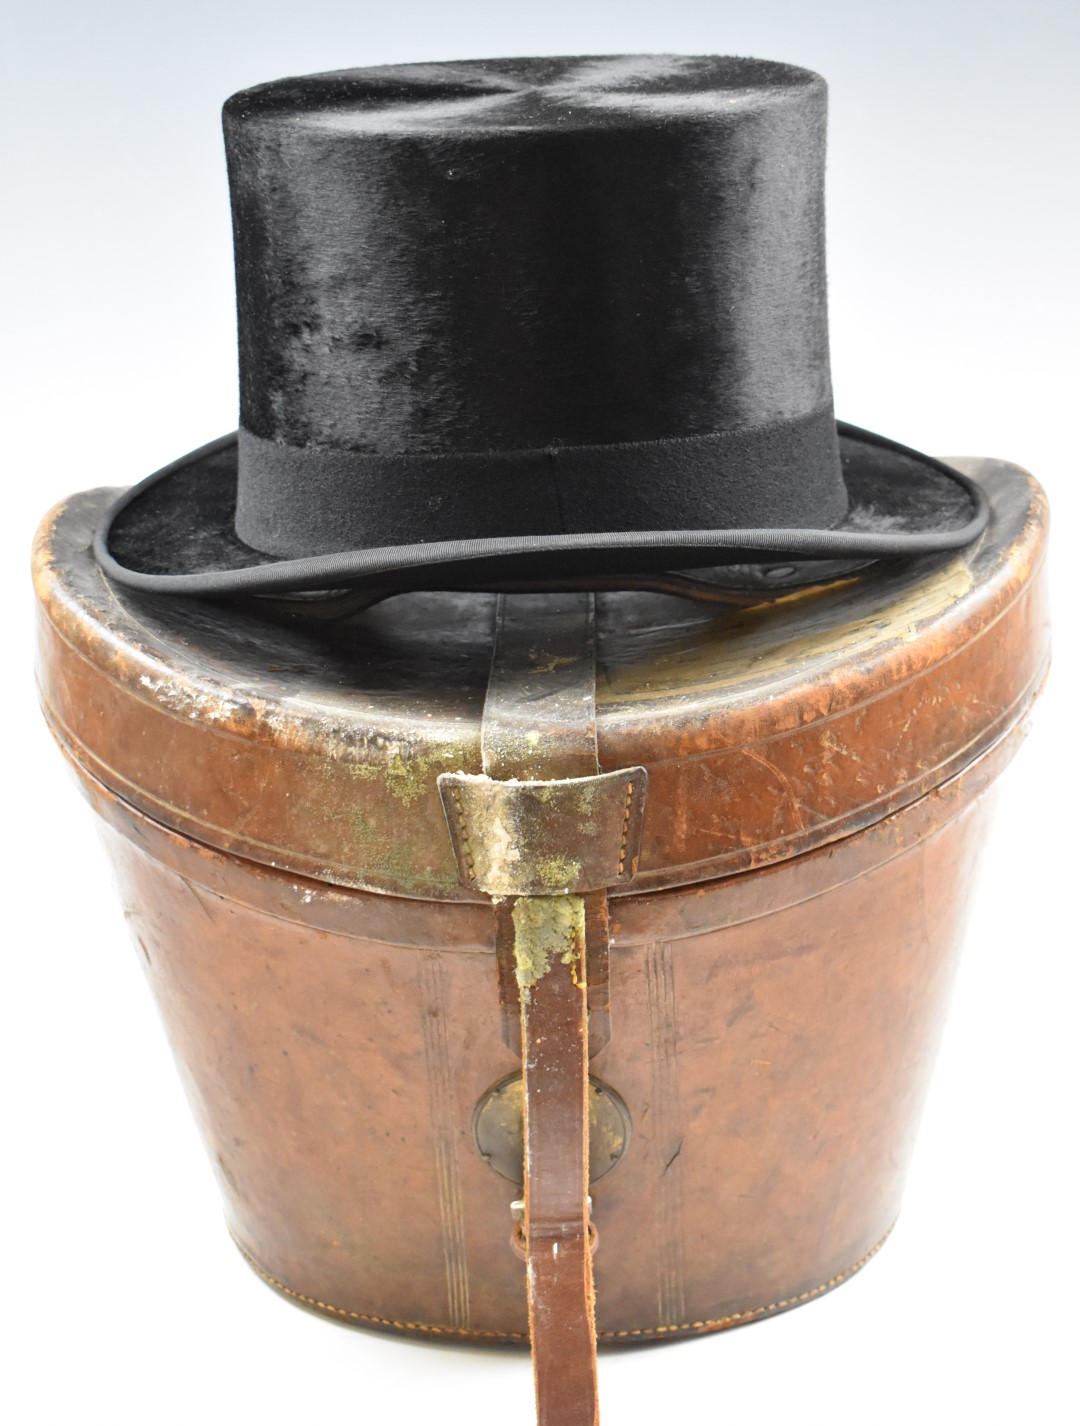 Christys', London black top hat, 20 x 16.5cm, in vintage leather case with G W labels